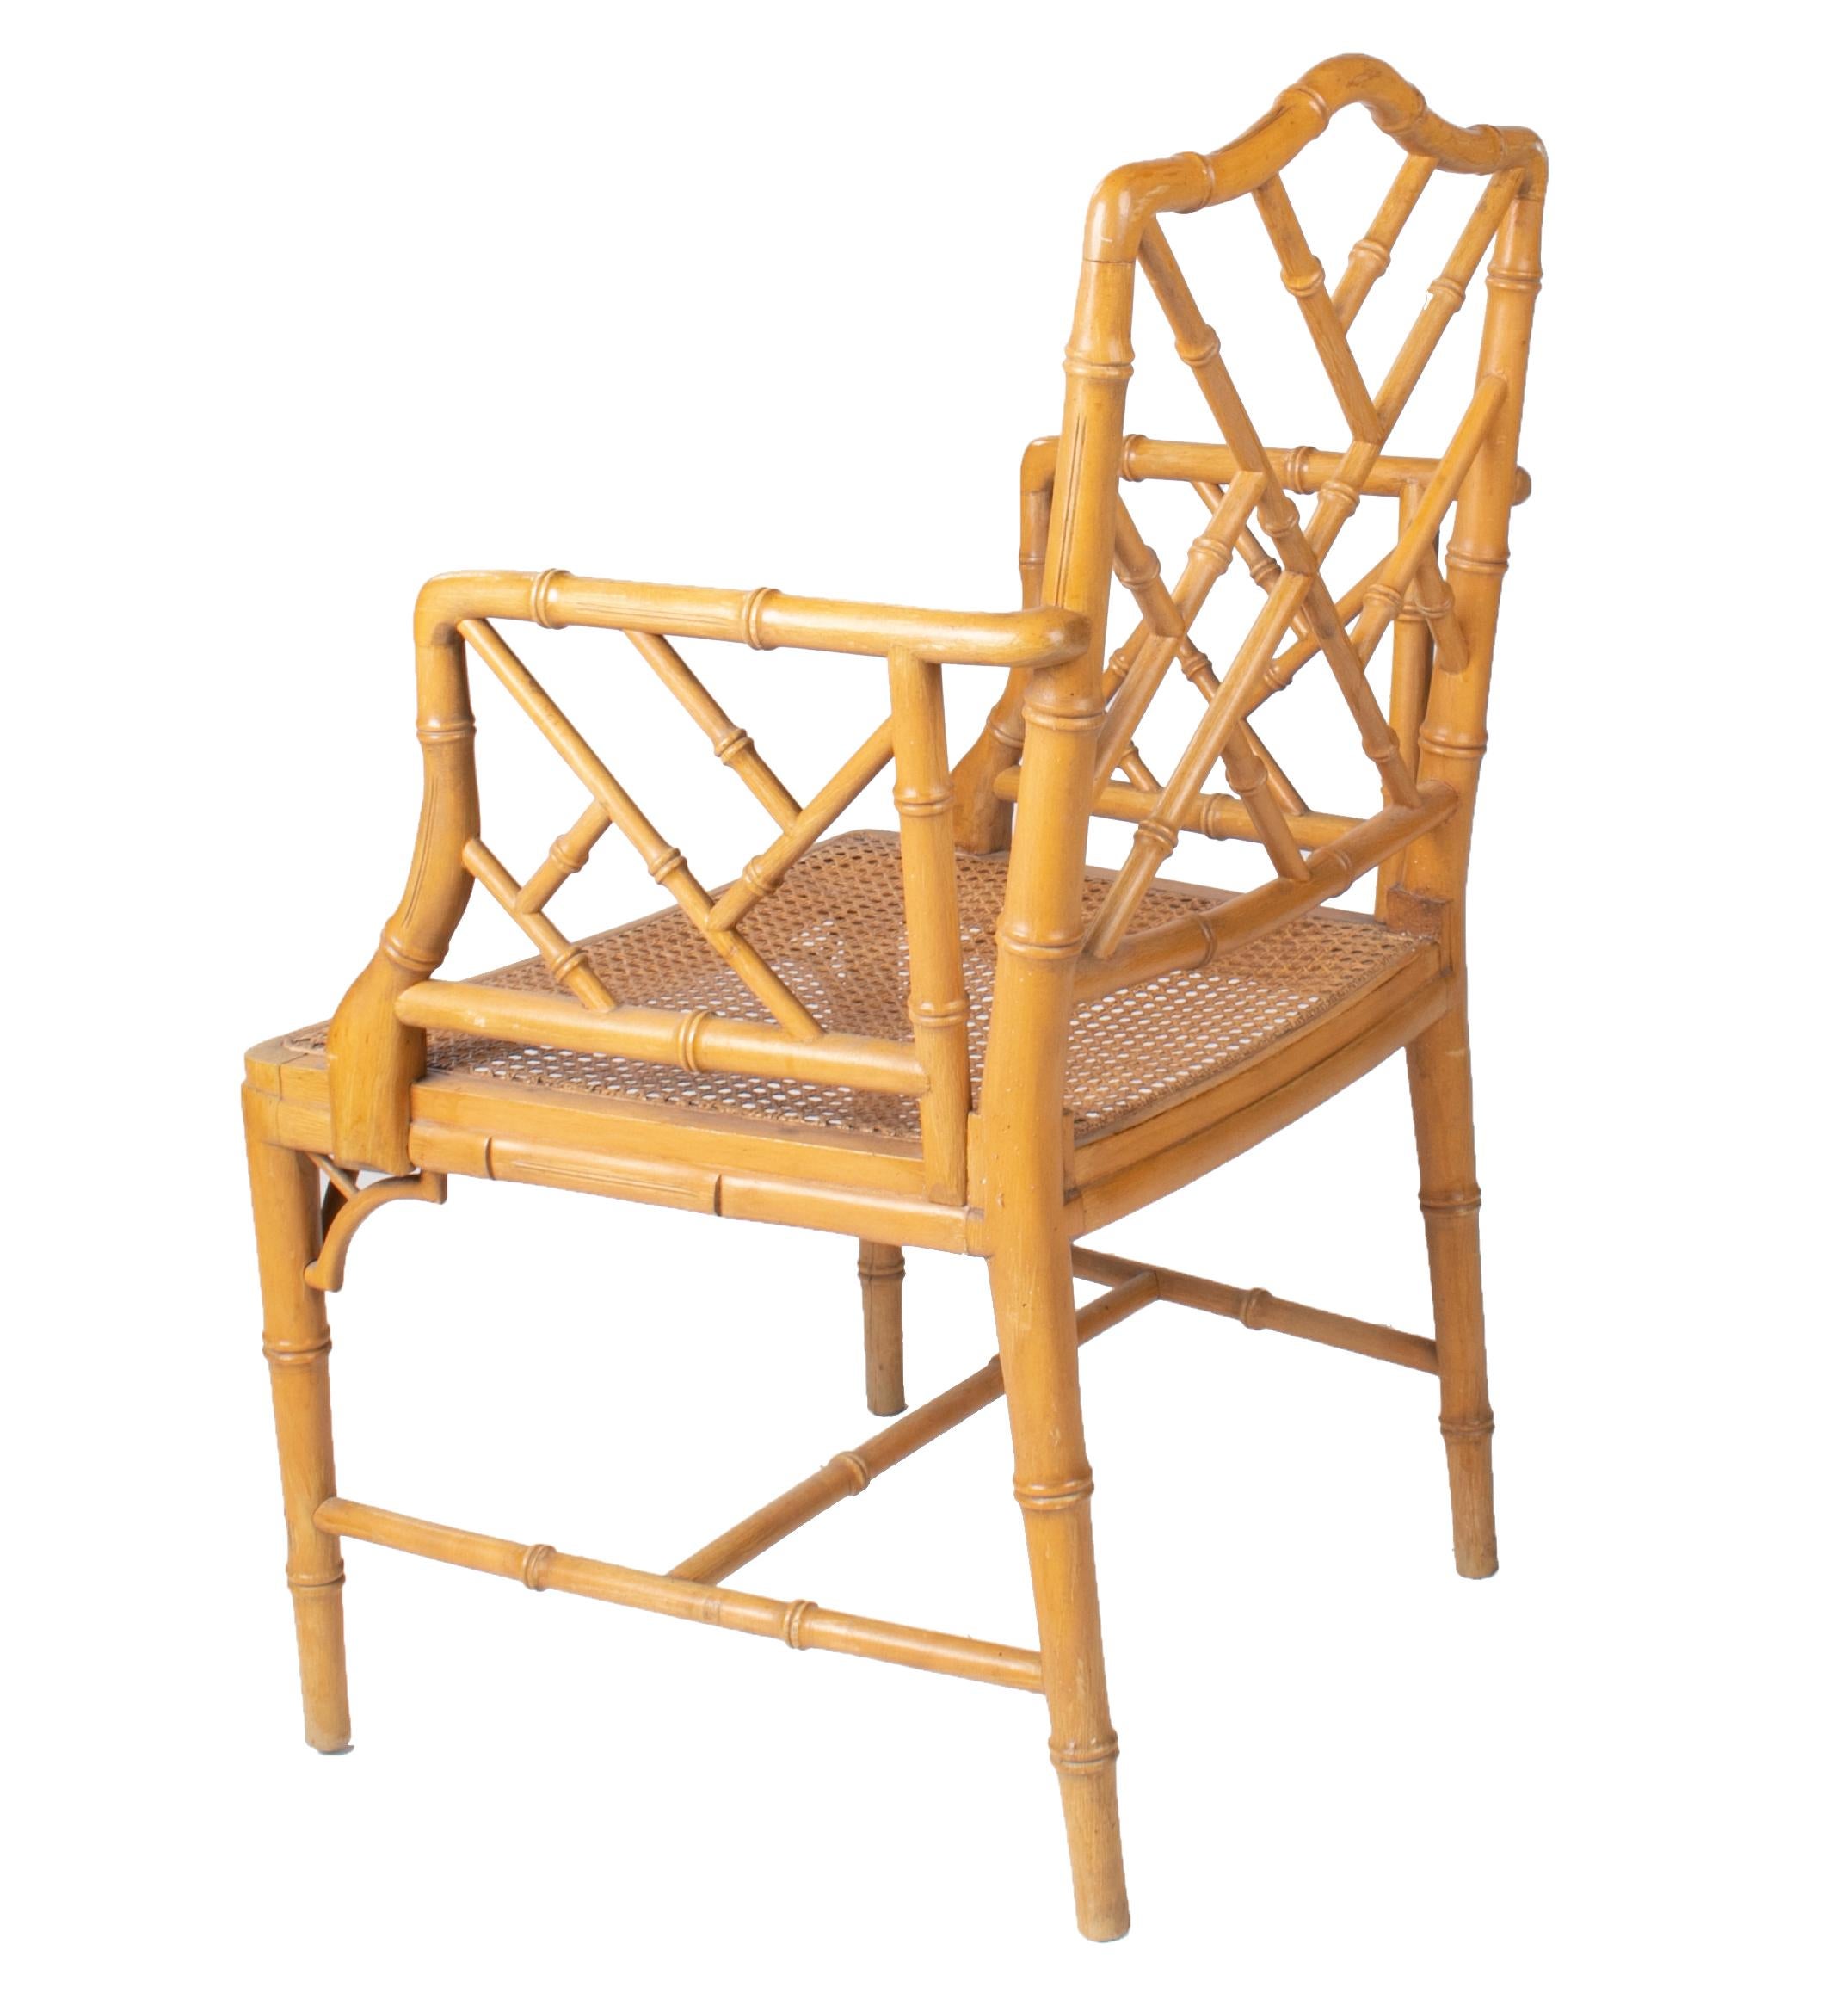 20th Century 1970s Spanish Wooden Armchair Imitating Bamboo with Woven Wicker Seat